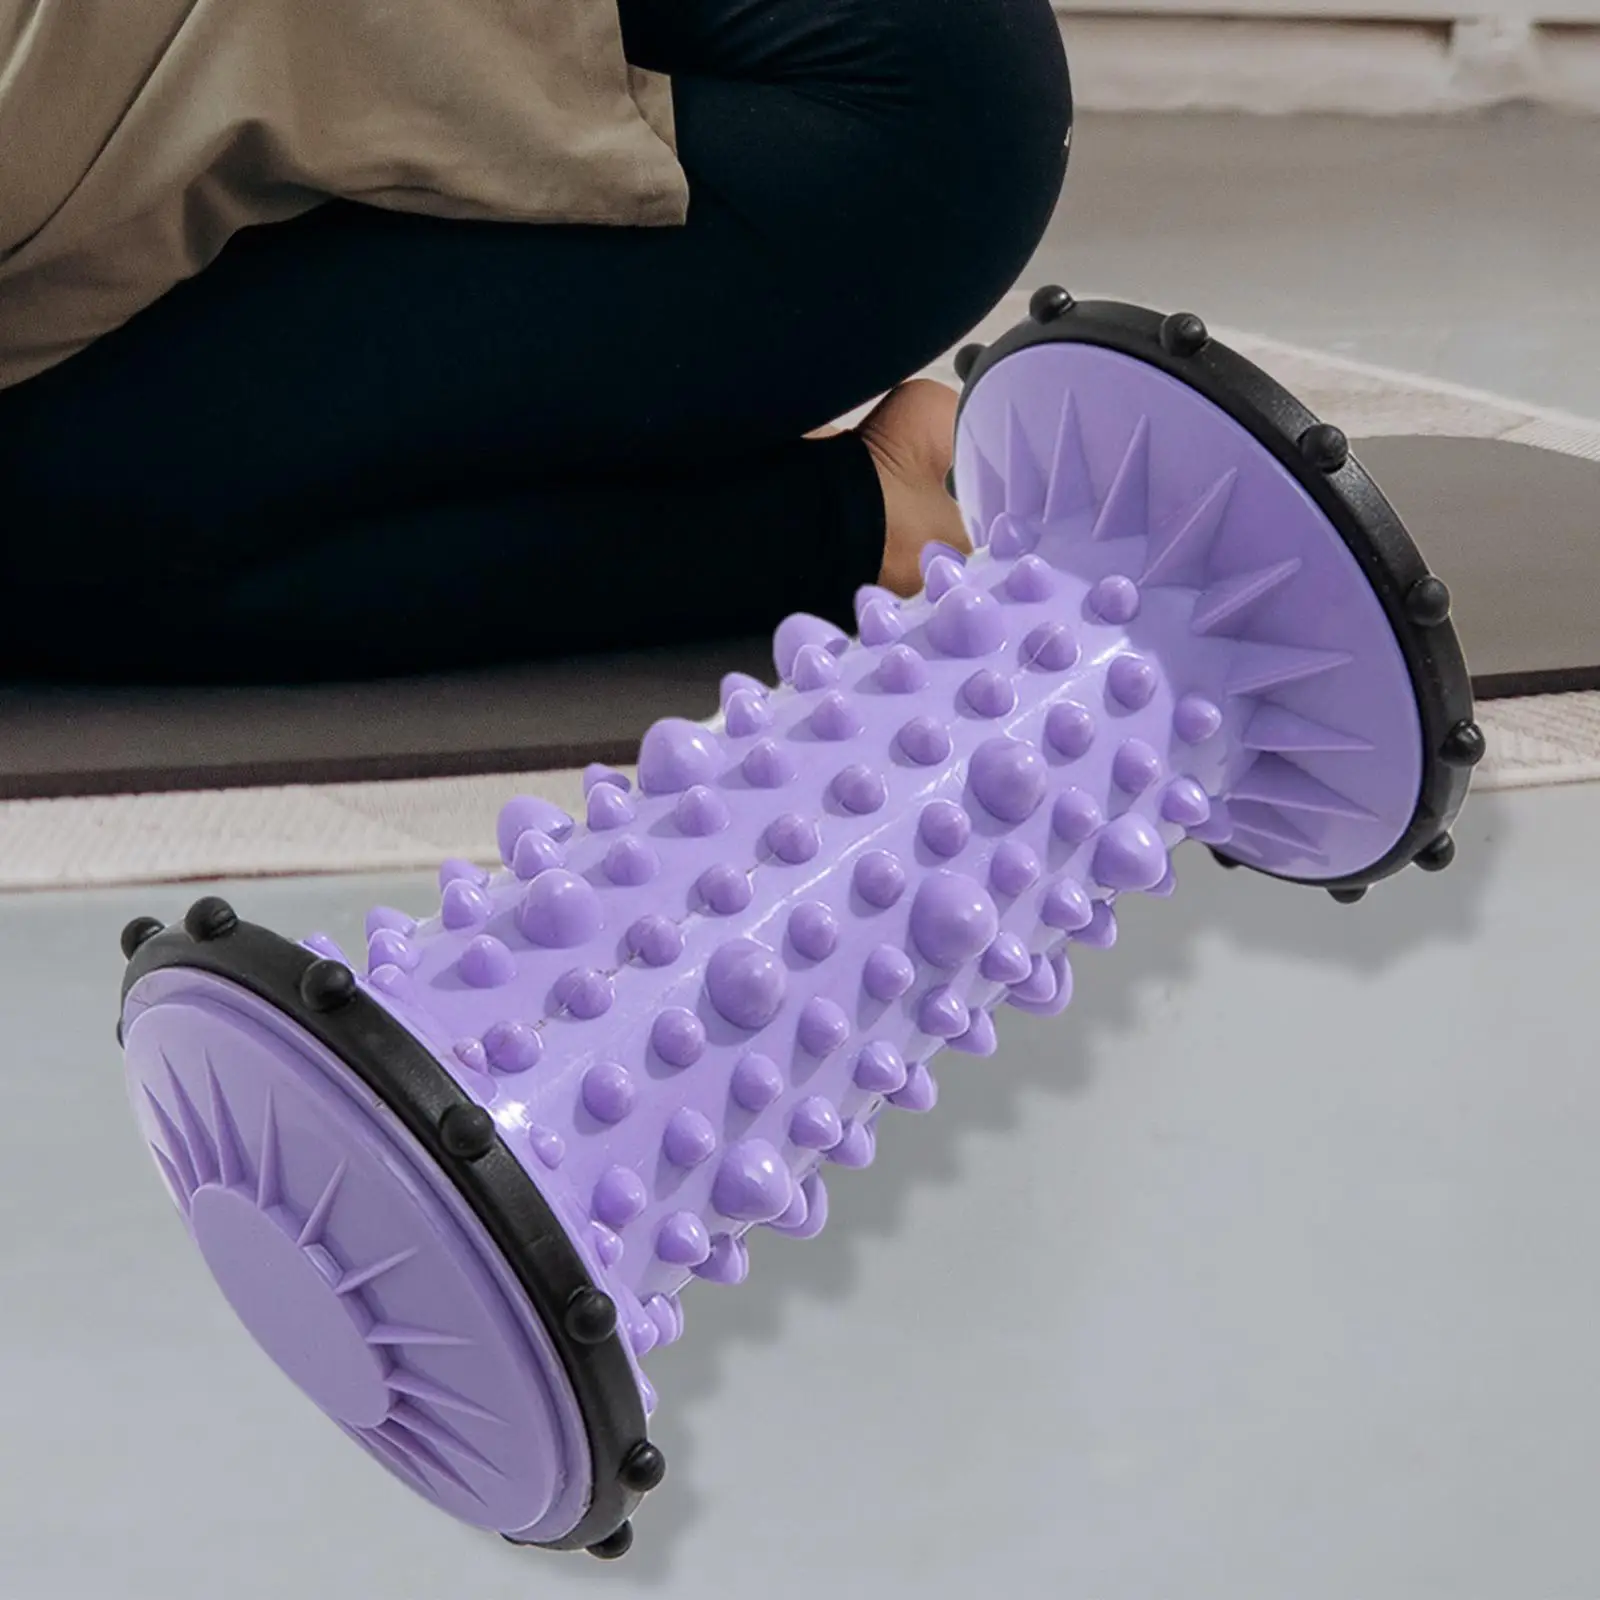 Foot Roller Portable Roller Tight Muscles Relax Durable Foot Massage Roller